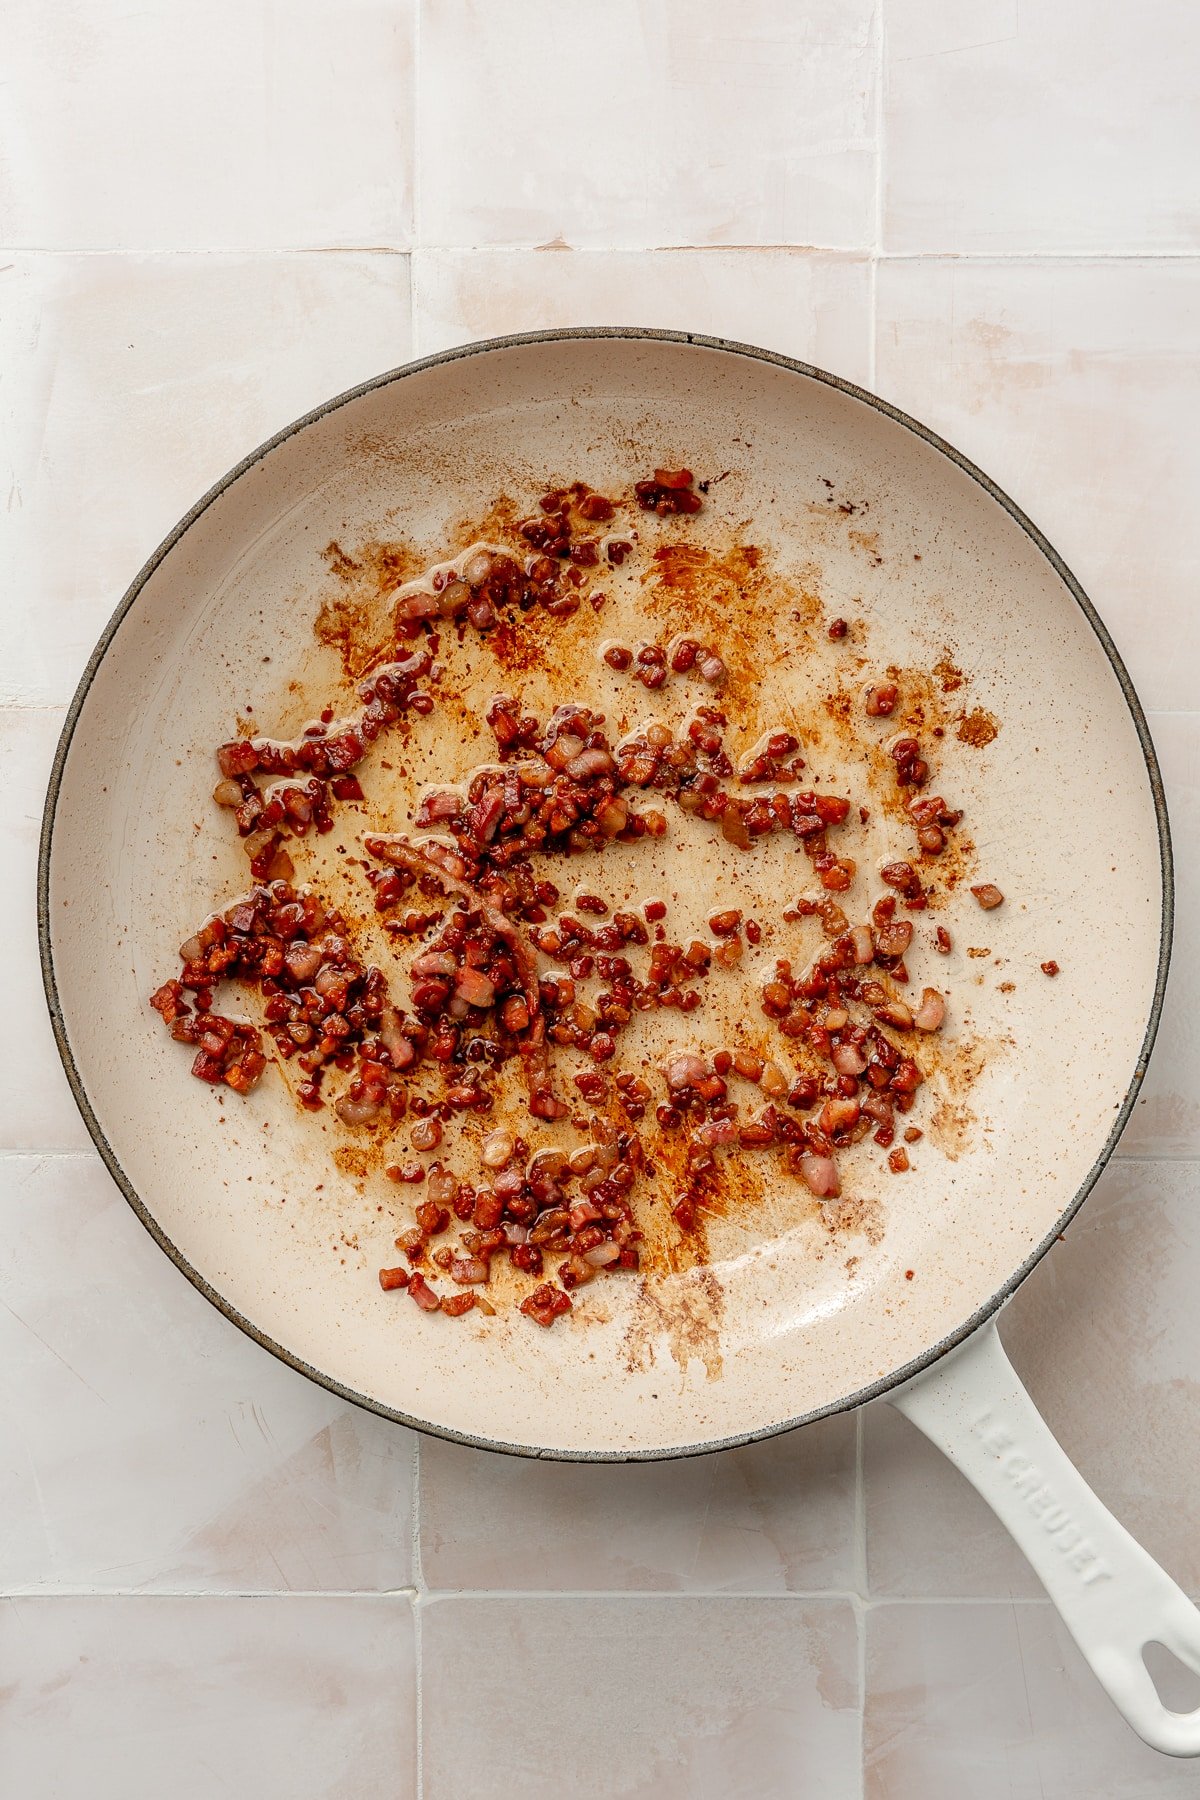 Chopped bacon is shown being cooked in a white frying pan.